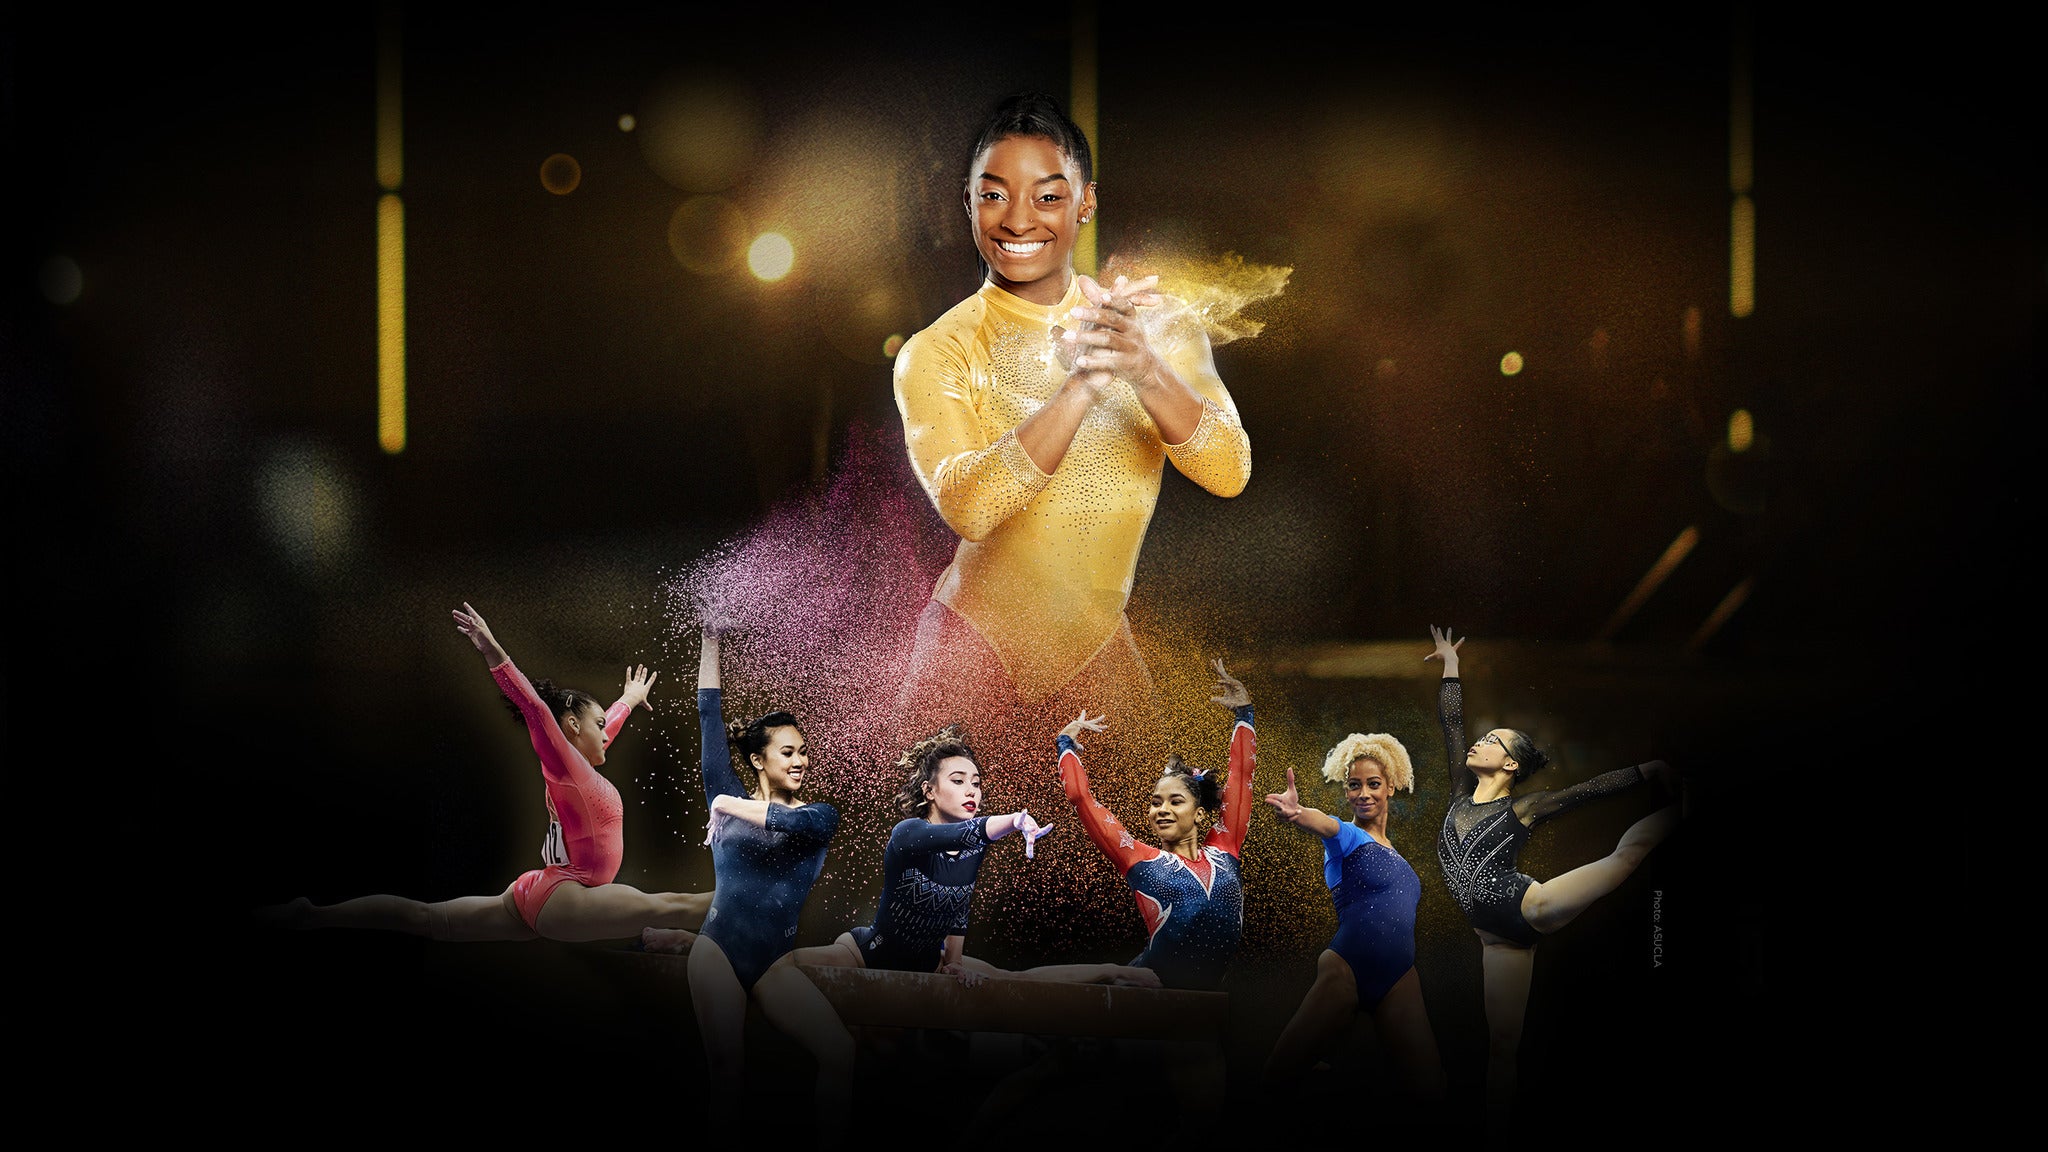 G.O.A.T. Gold Over America Tour Starring Simone Biles in Fort Worth promo photo for Official Platinum presale offer code